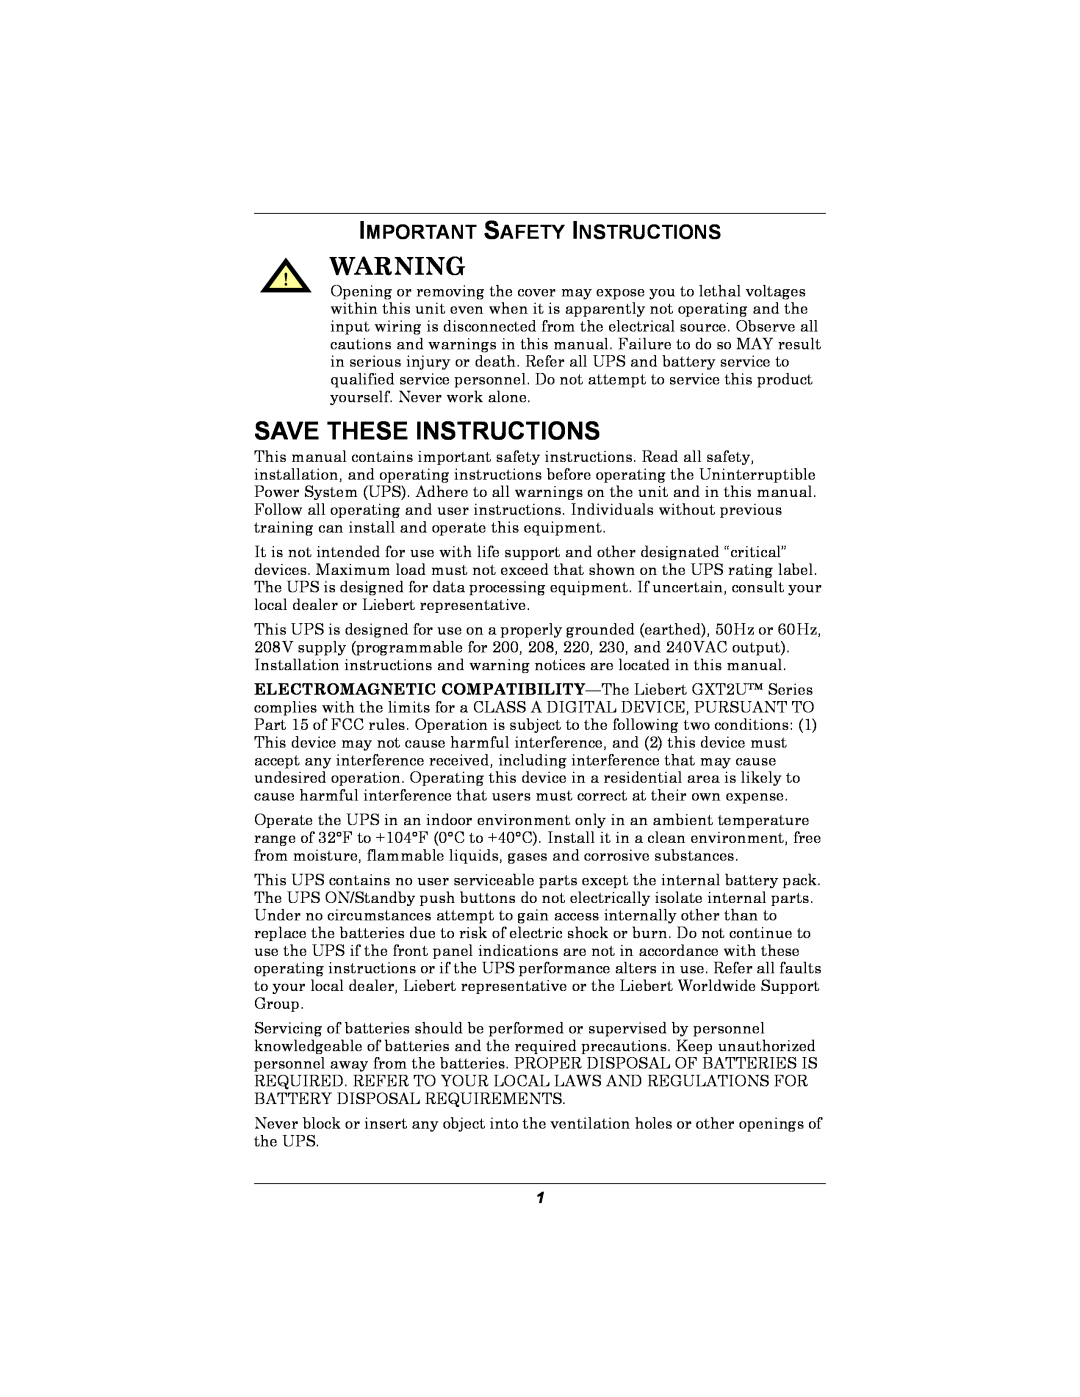 Emerson GXT2U user manual Save These Instructions, Important Safety Instructions 